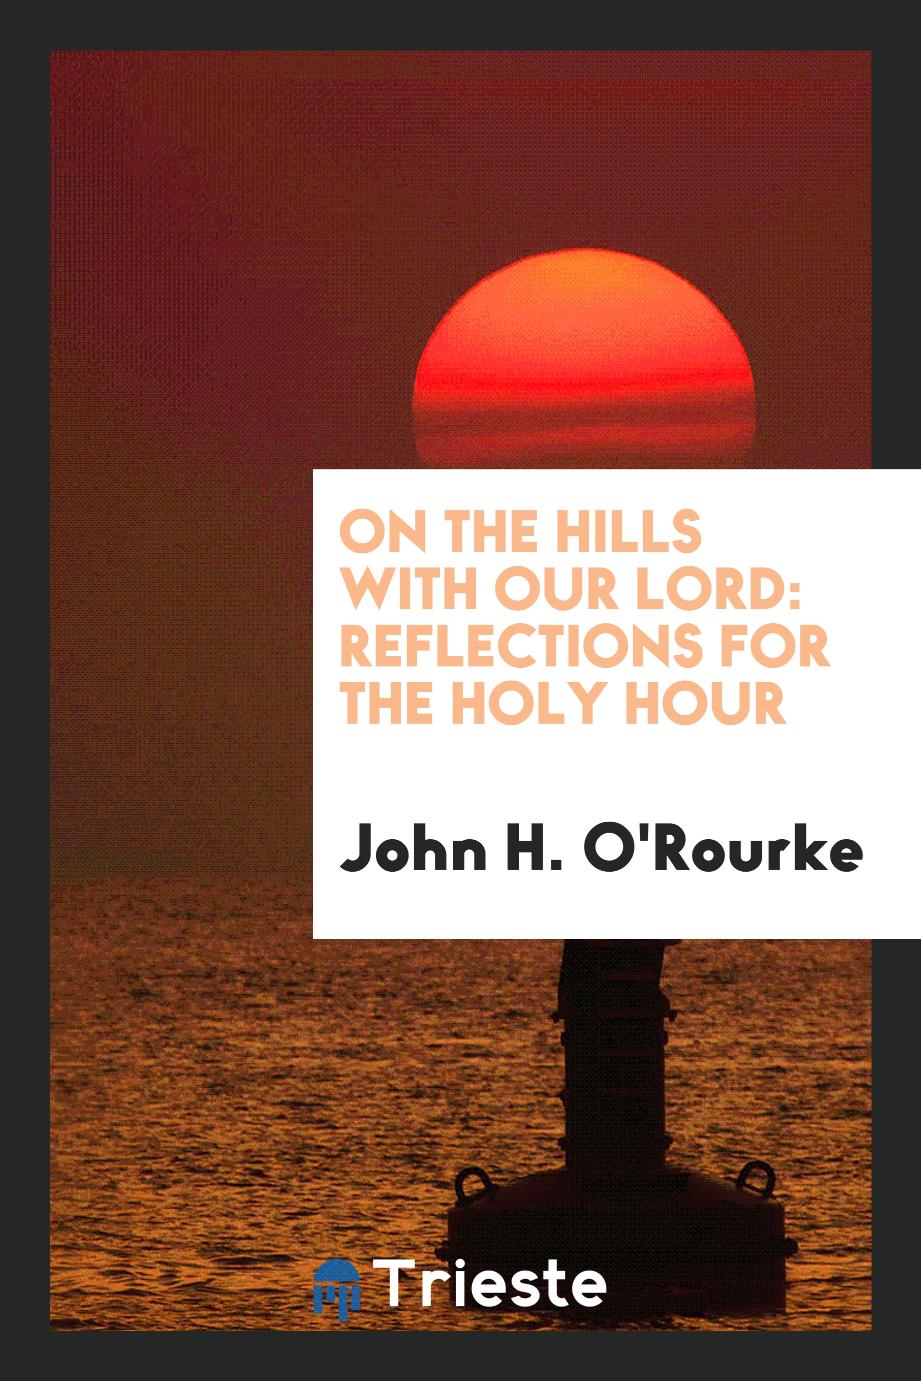 On the hills with Our Lord: reflections for the Holy Hour